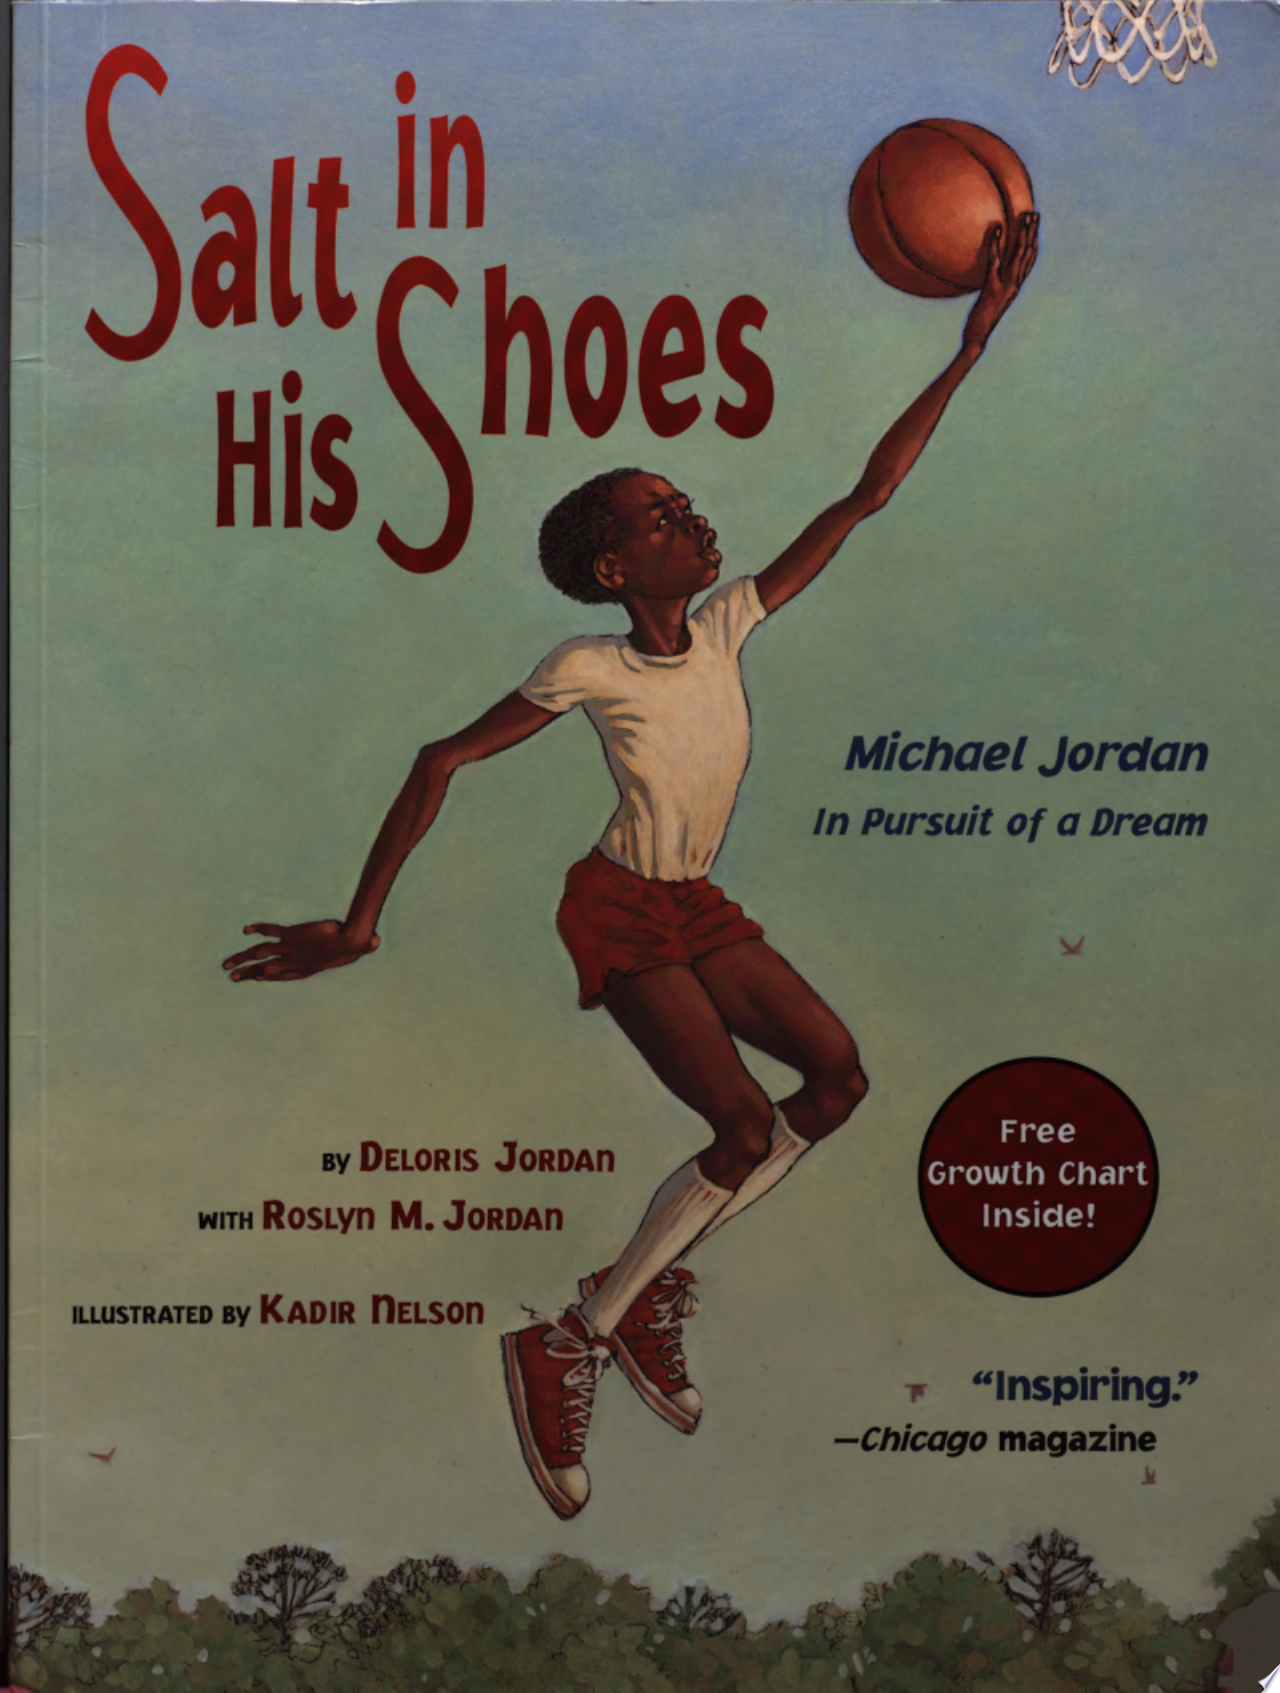 Image for "Salt in His Shoes"